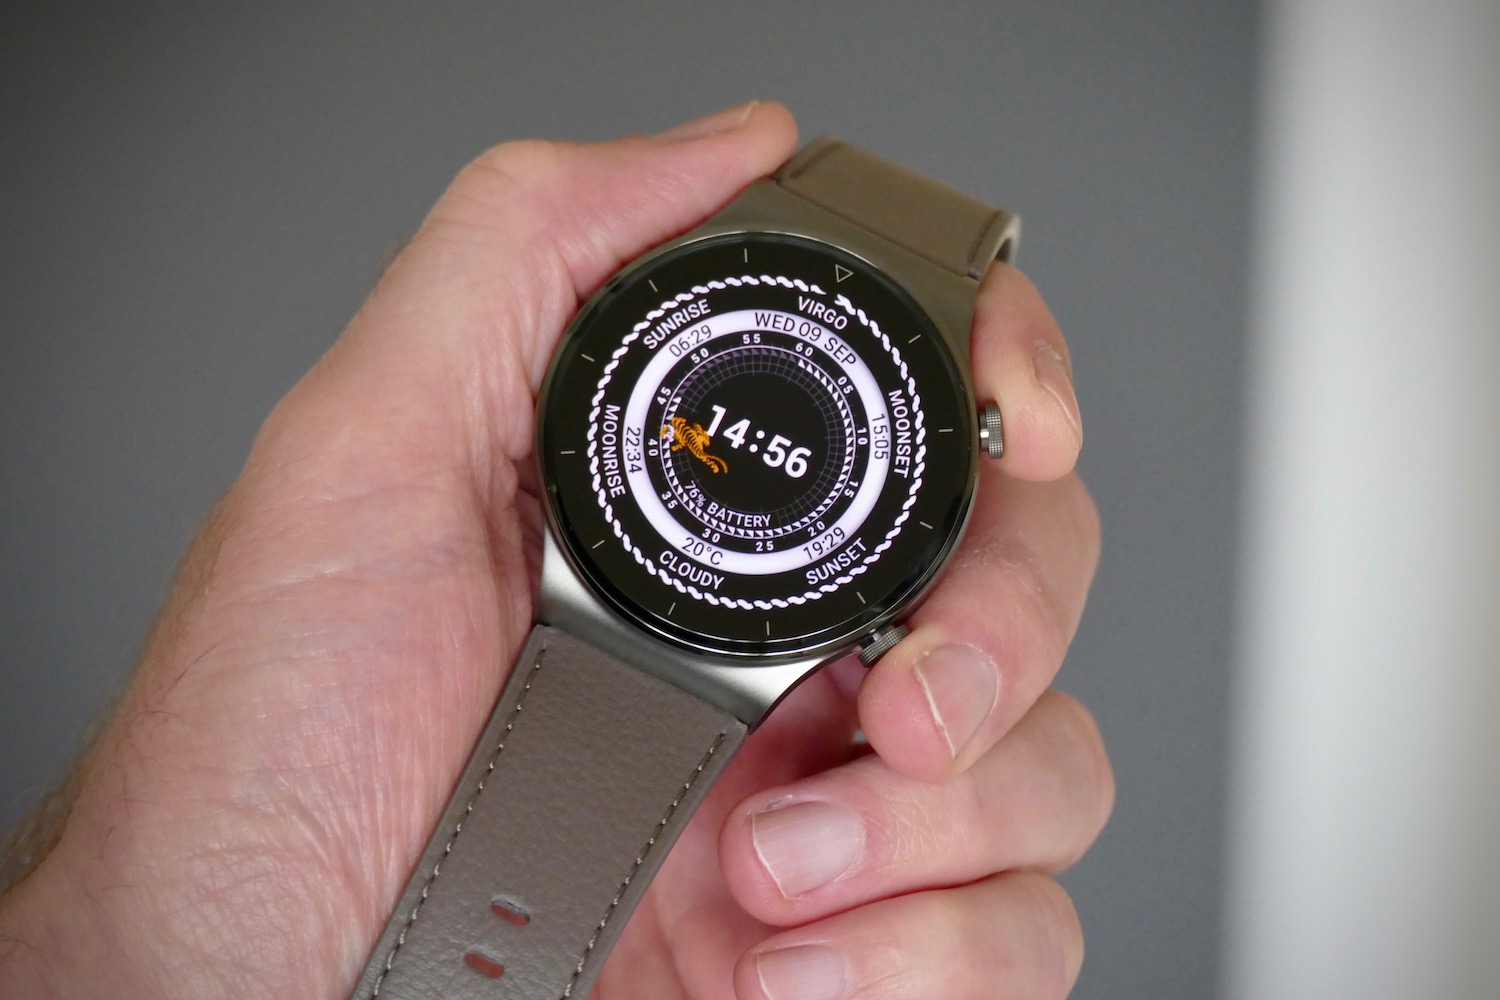 huawei watch gt2 pro hands on features price photos release date caged tiger